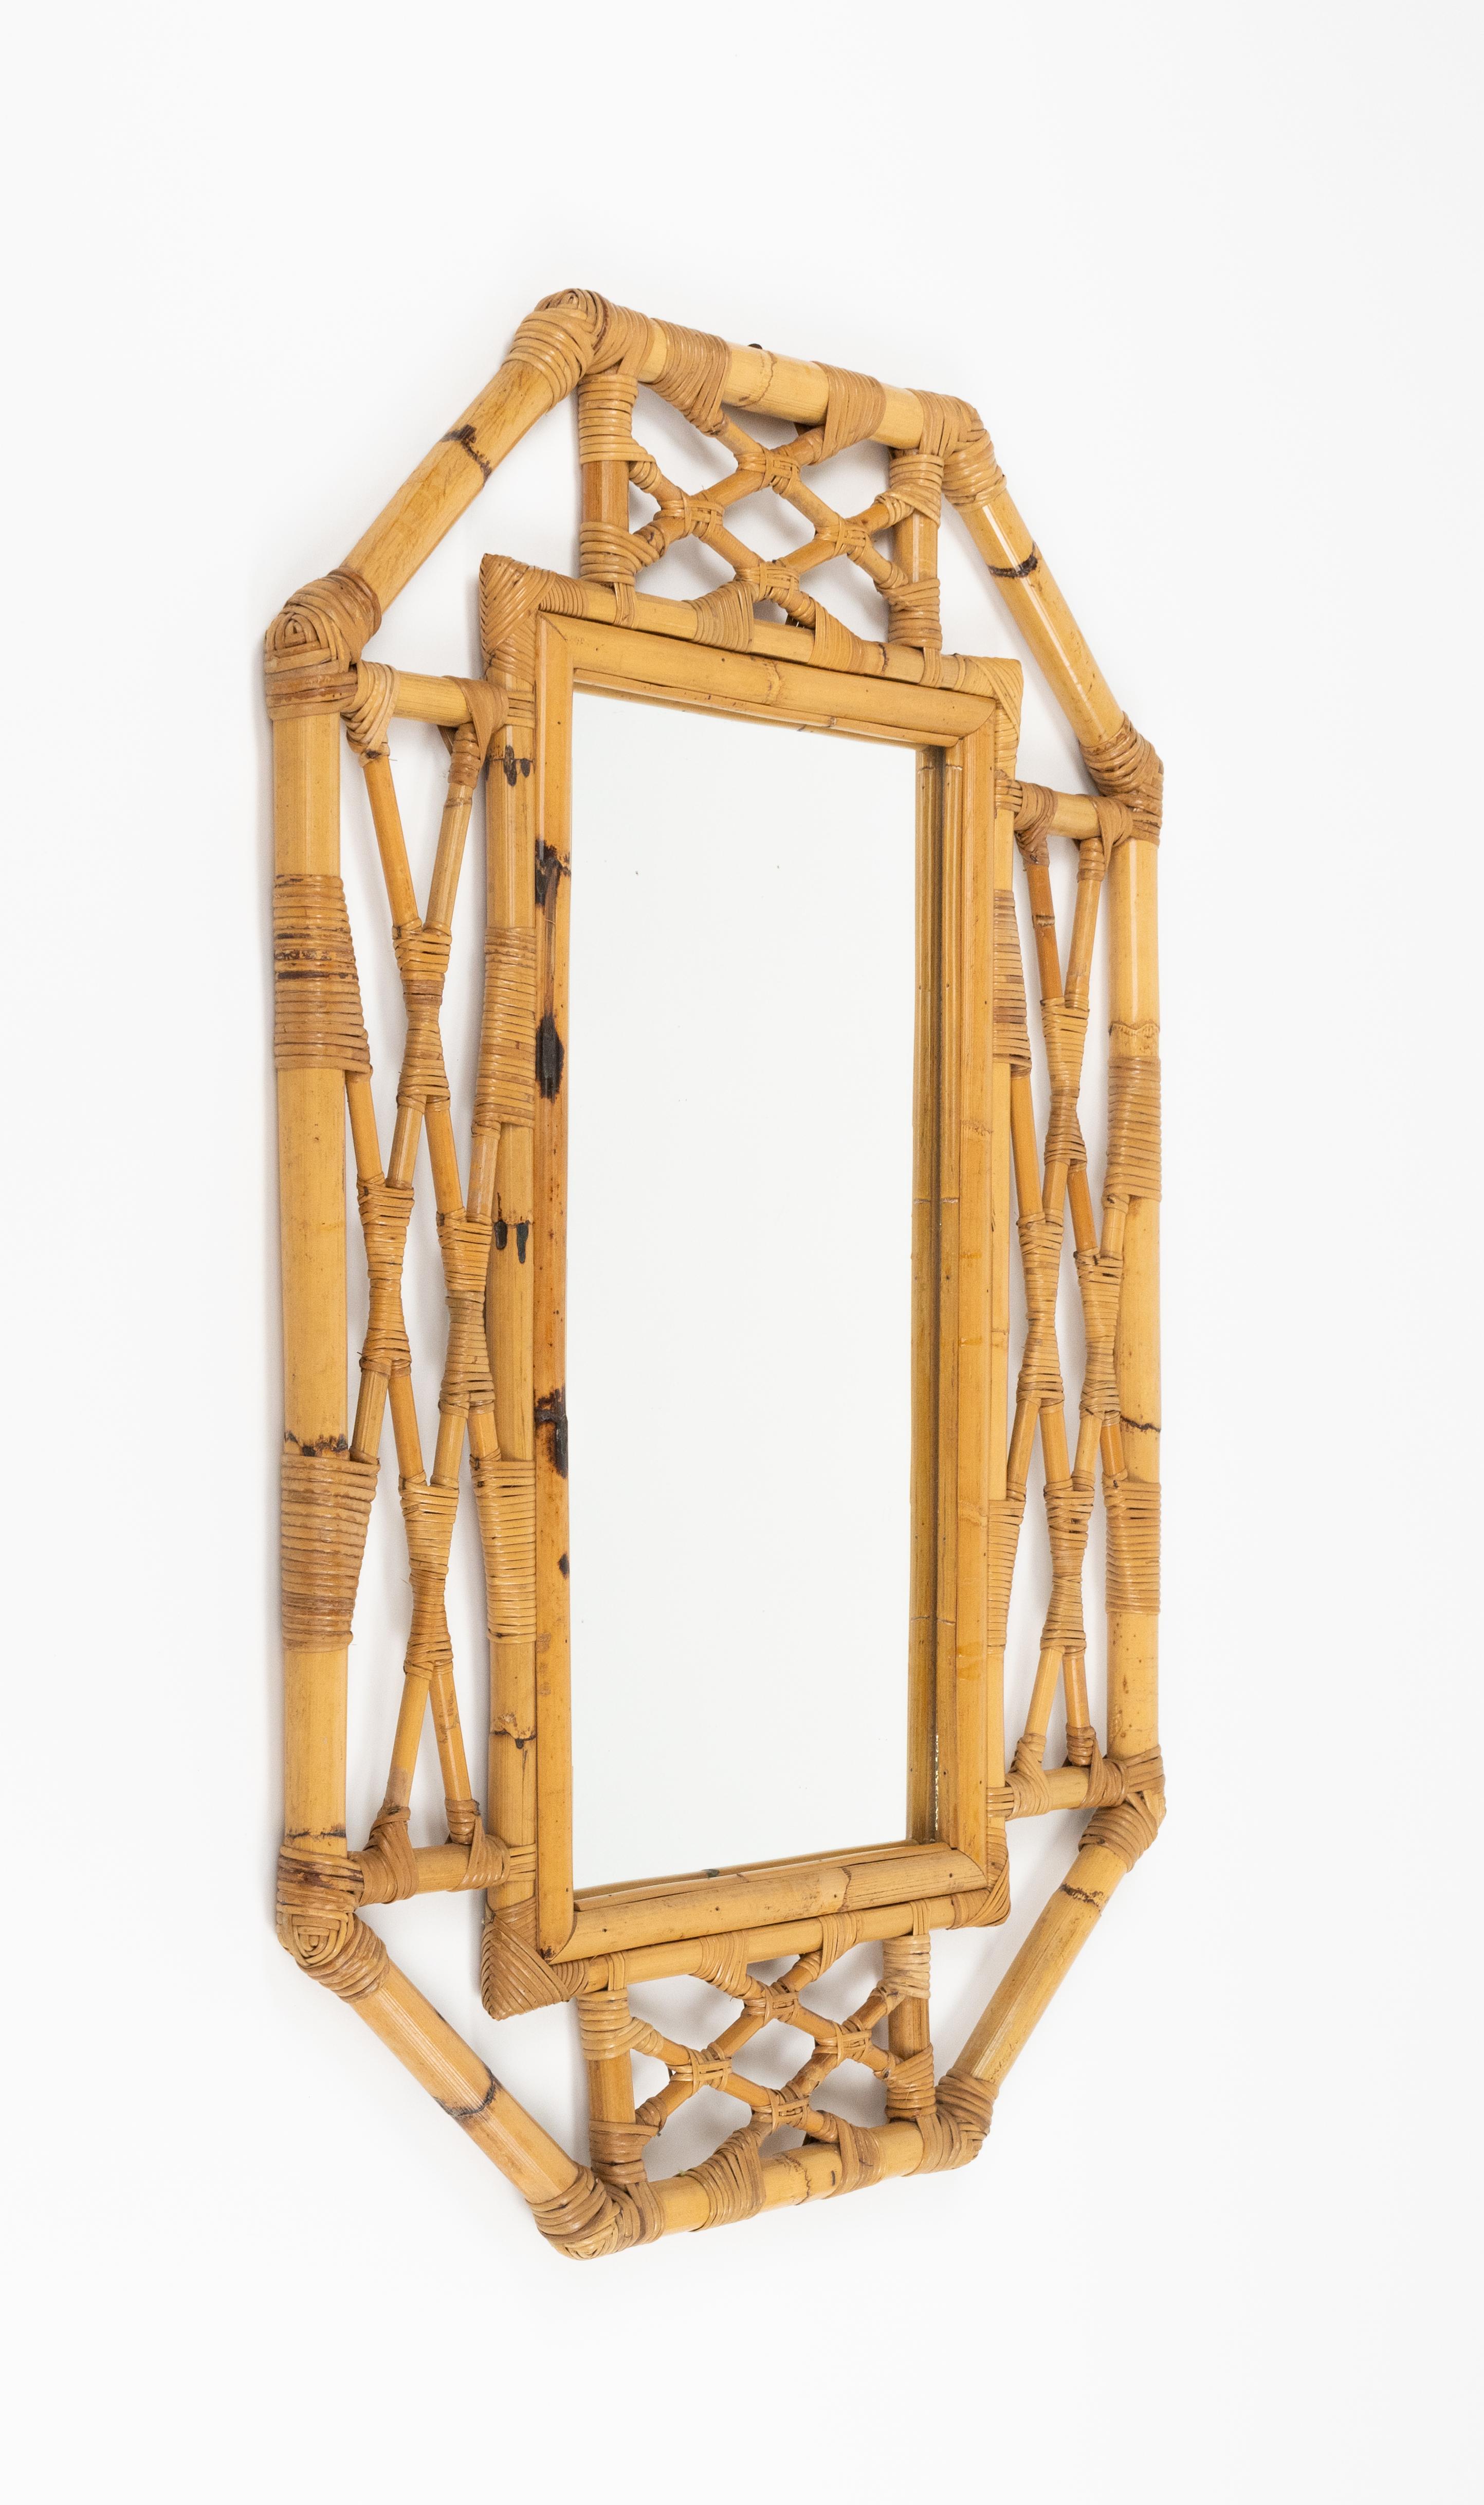 Mid-Century Modern Midcentury Bamboo and Rattan Wall Mirror Vivai Del Sud Style, Italy 1970s For Sale